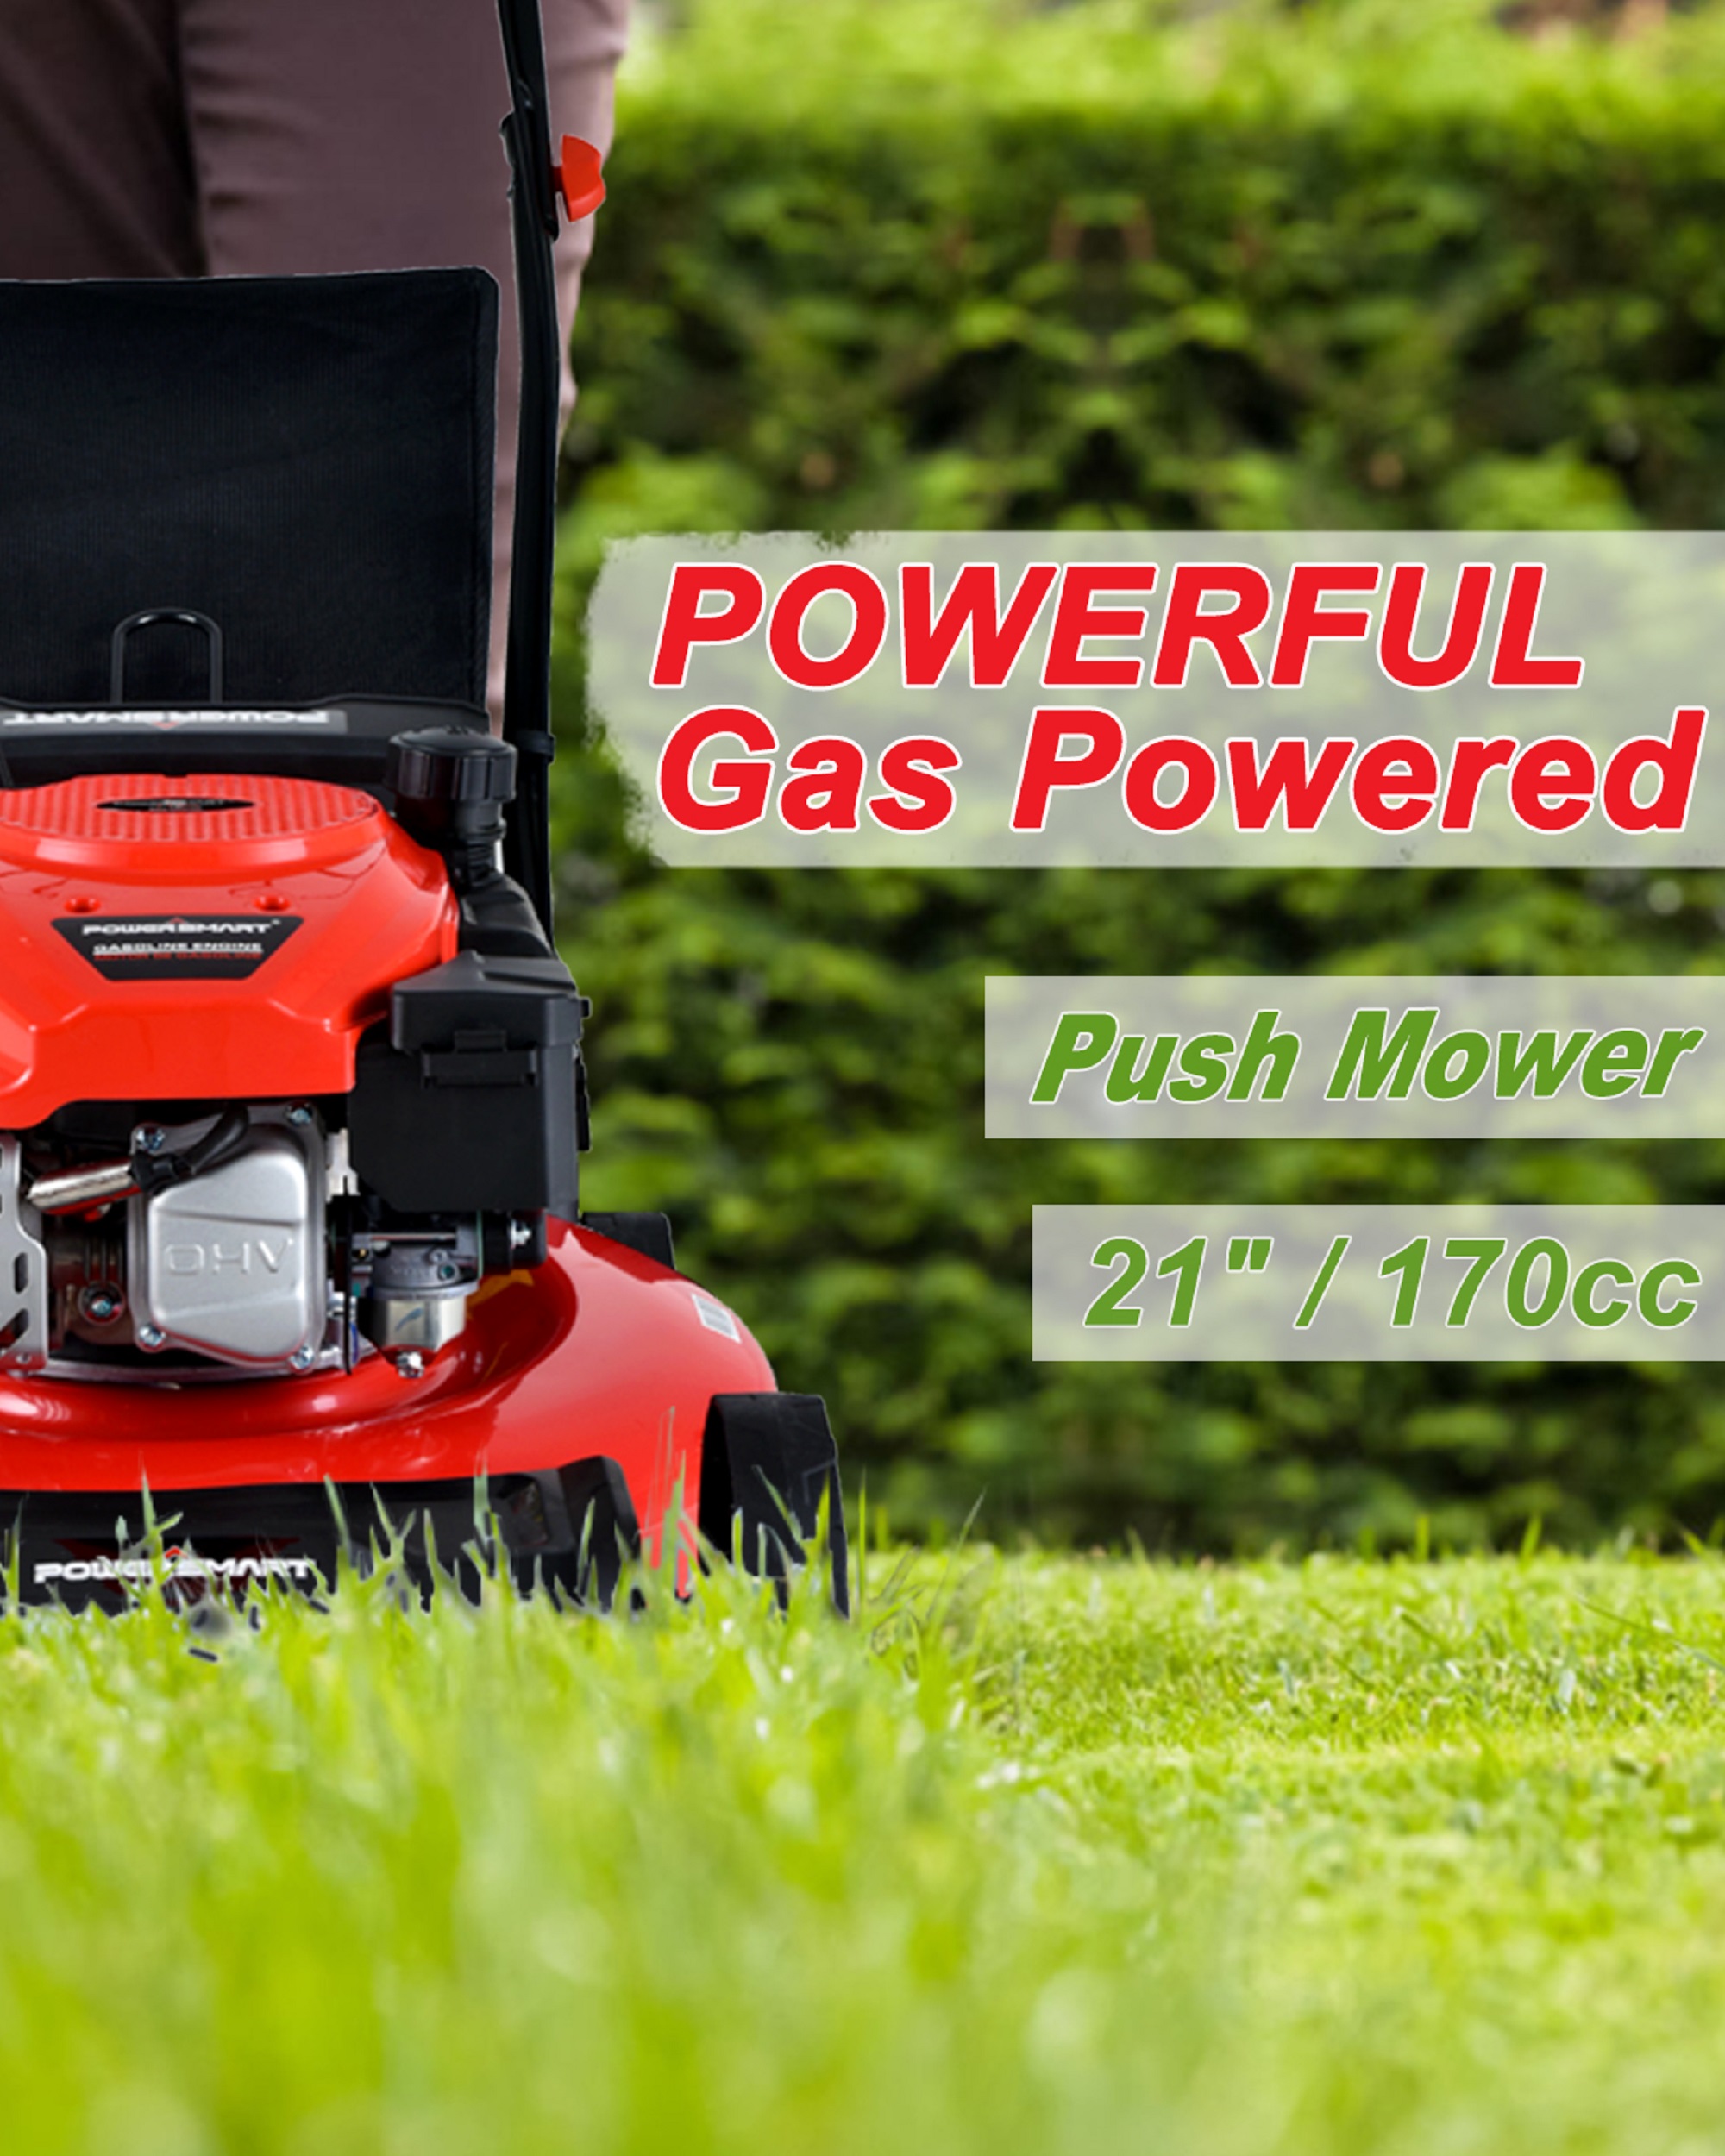 PowerSmart DB2194PR 21" 3-in-1 Gas Push Lawn Mower 170cc with Steel Deck - image 6 of 9